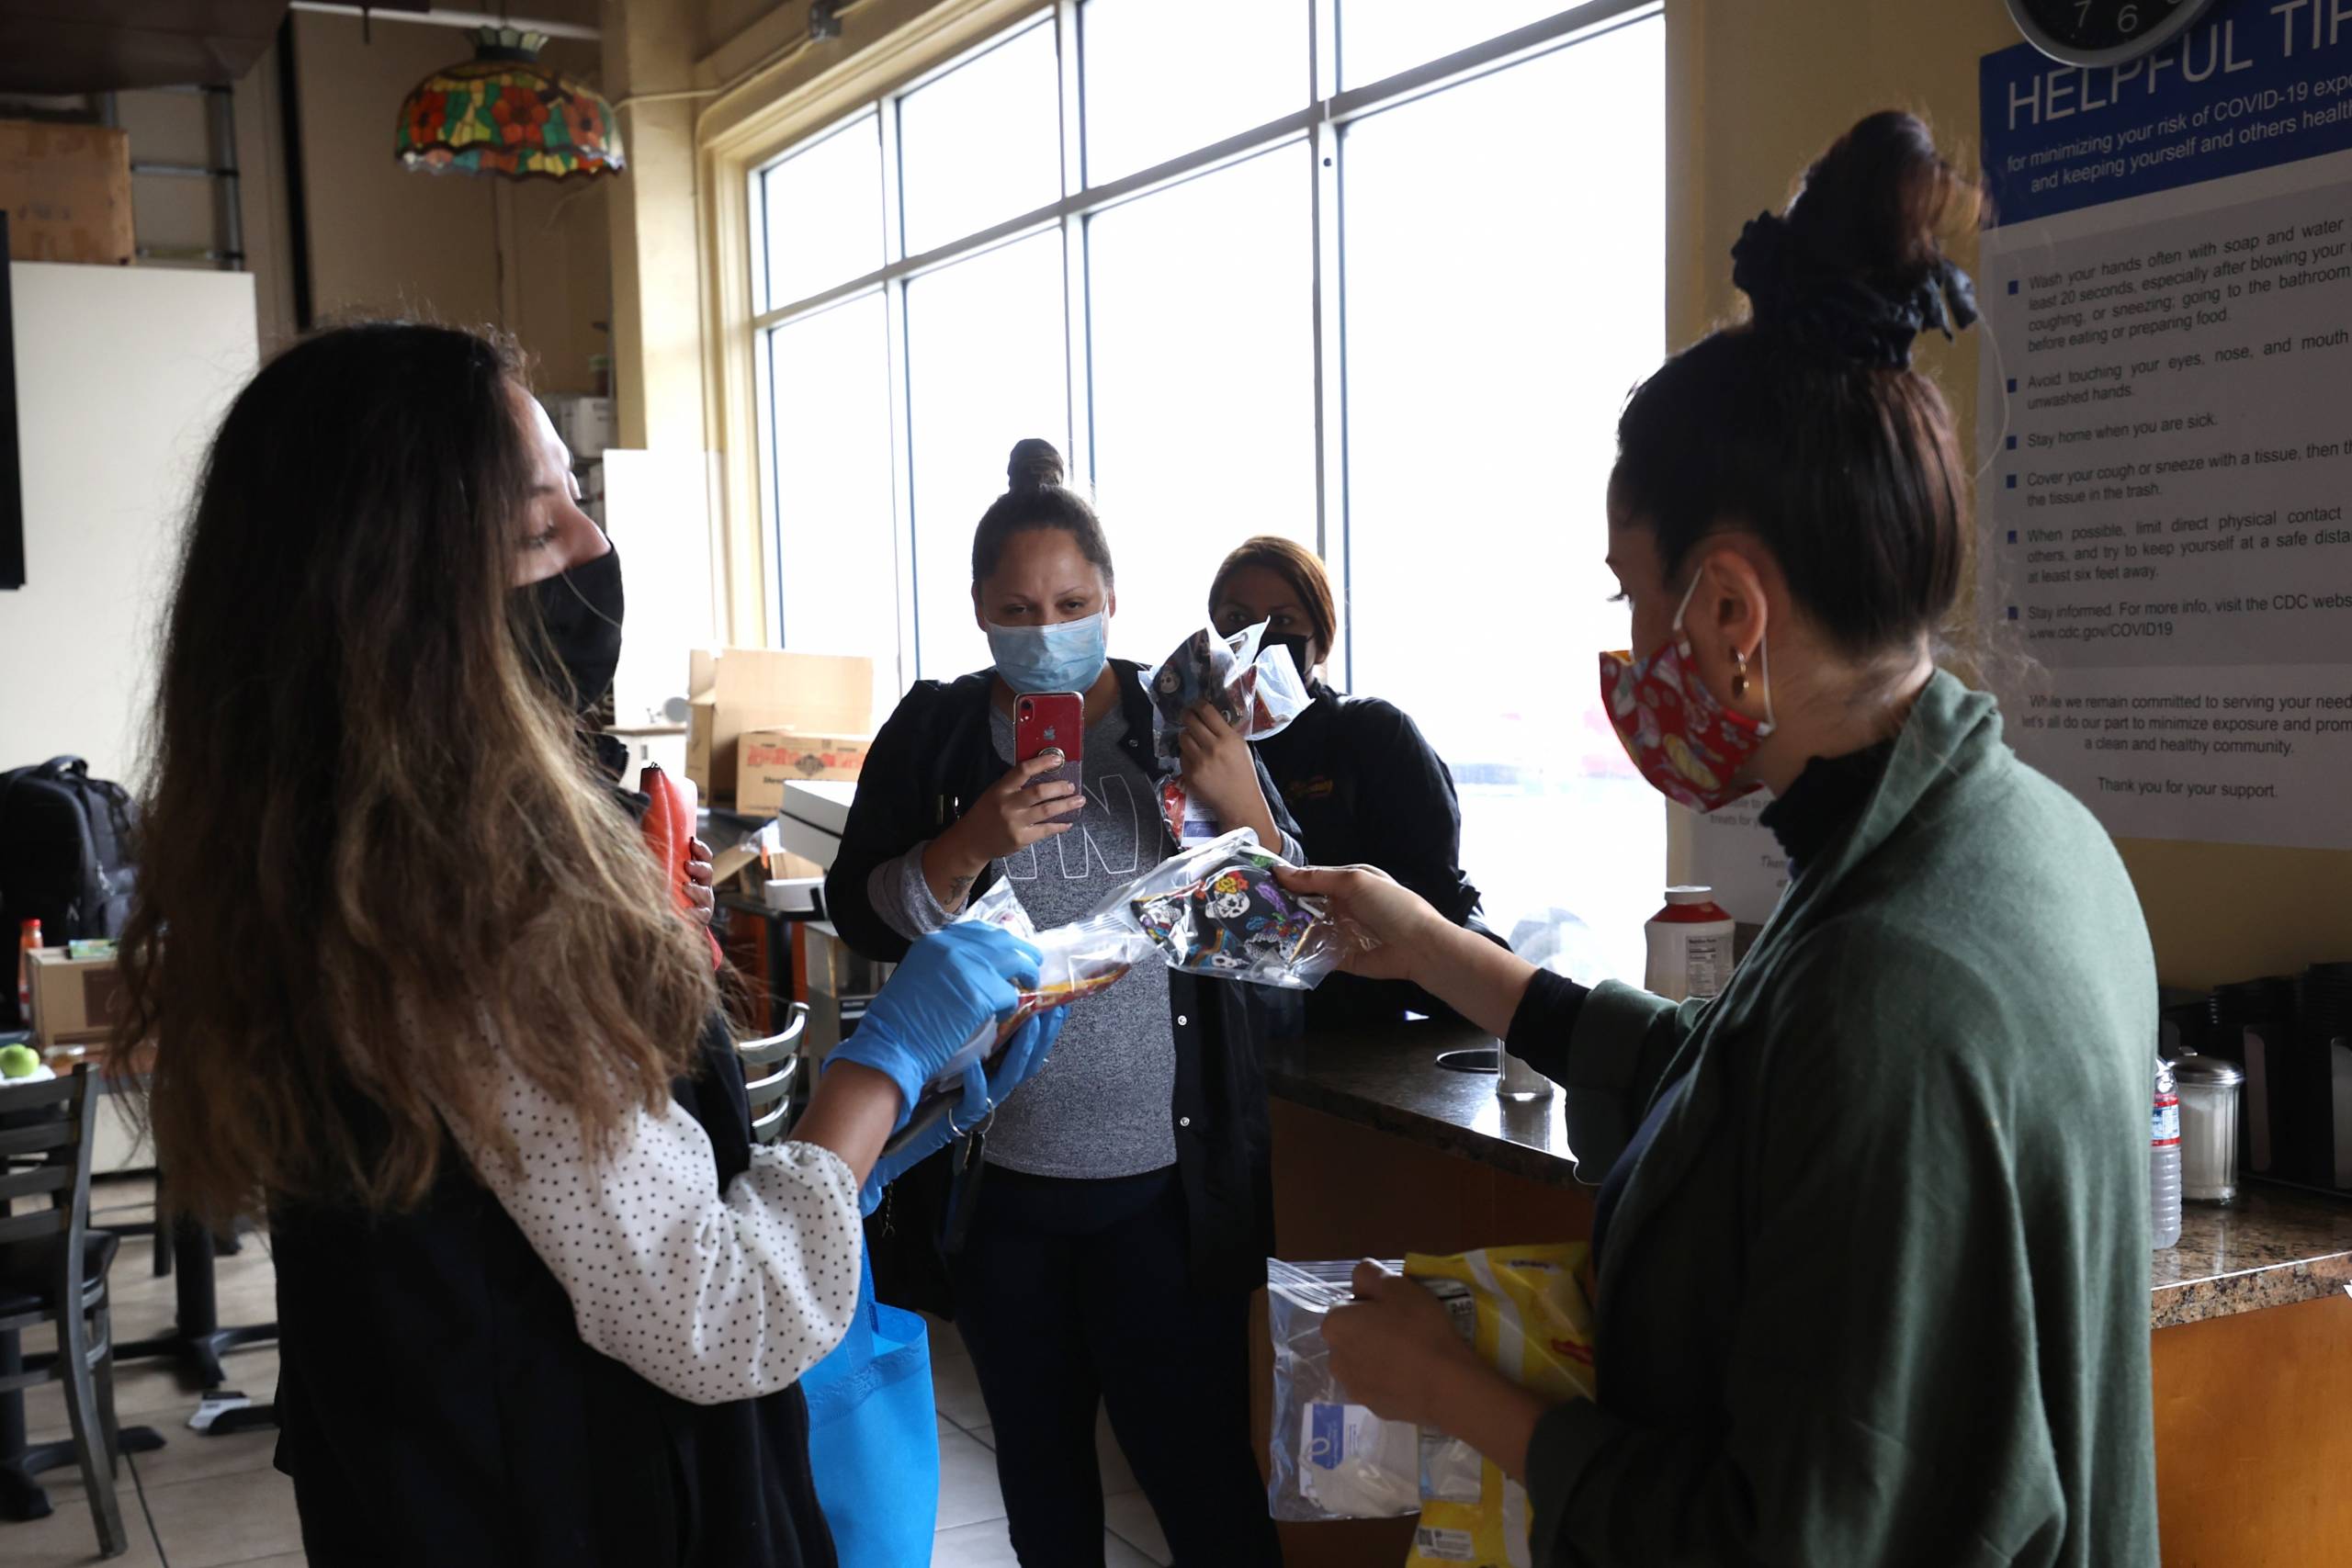 Three women wearing masks gathers inside a cafe. One hands another a set of face masks while the third records the scene on their phone.